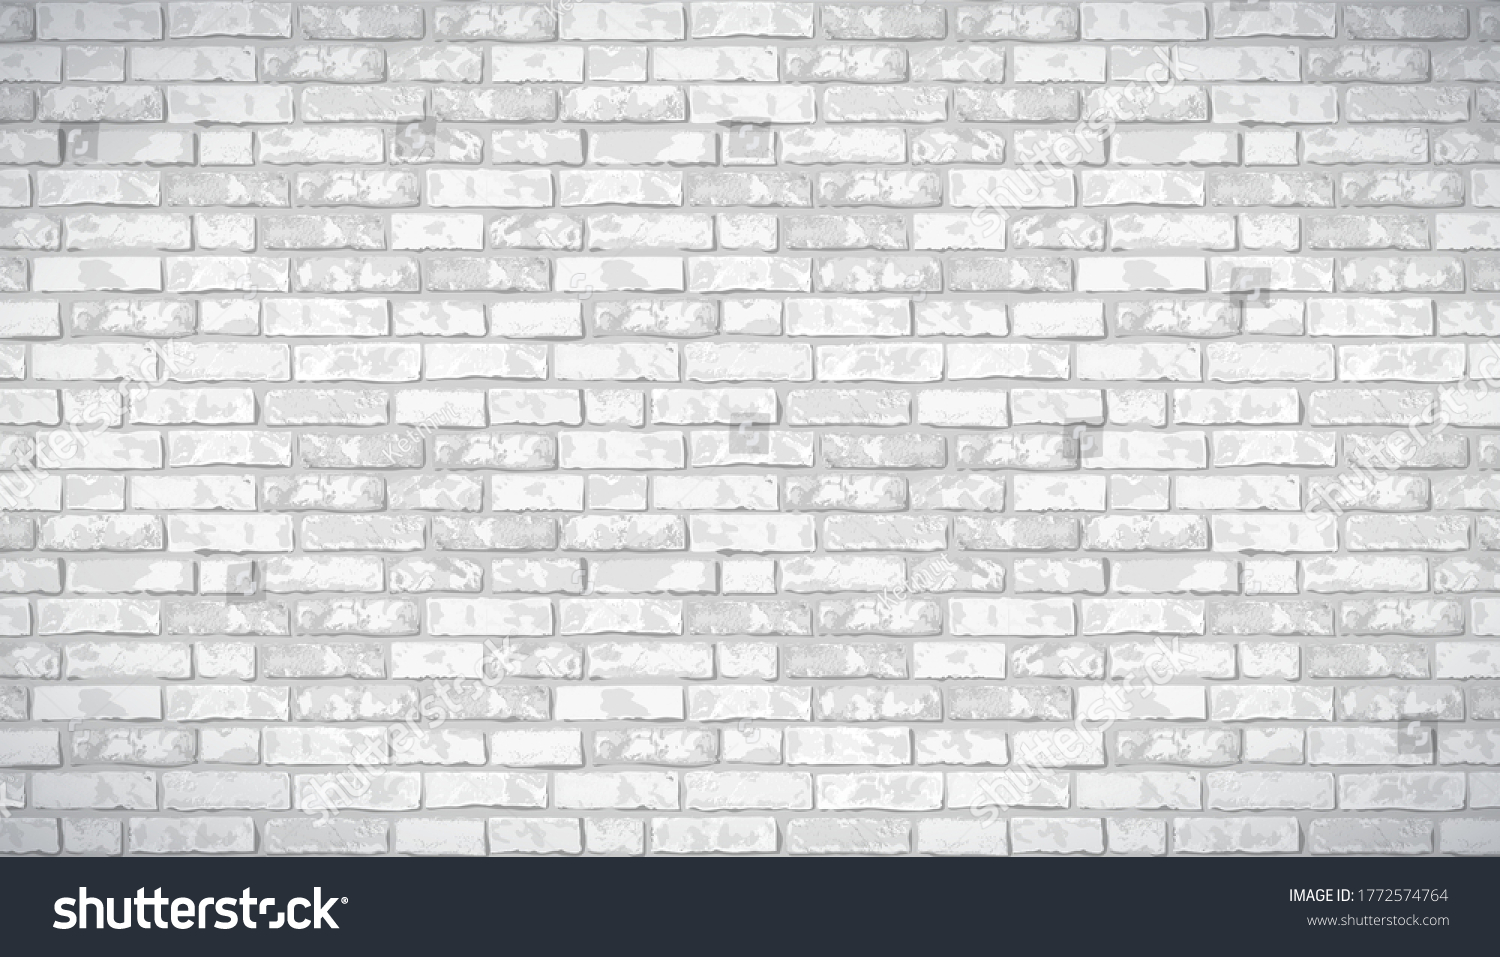 SVG of Realistic Vector brick wall pattern horizontal background. Flat wall texture. White textured brickwork for print, paper, design, decor, photo background, wallpaper. svg